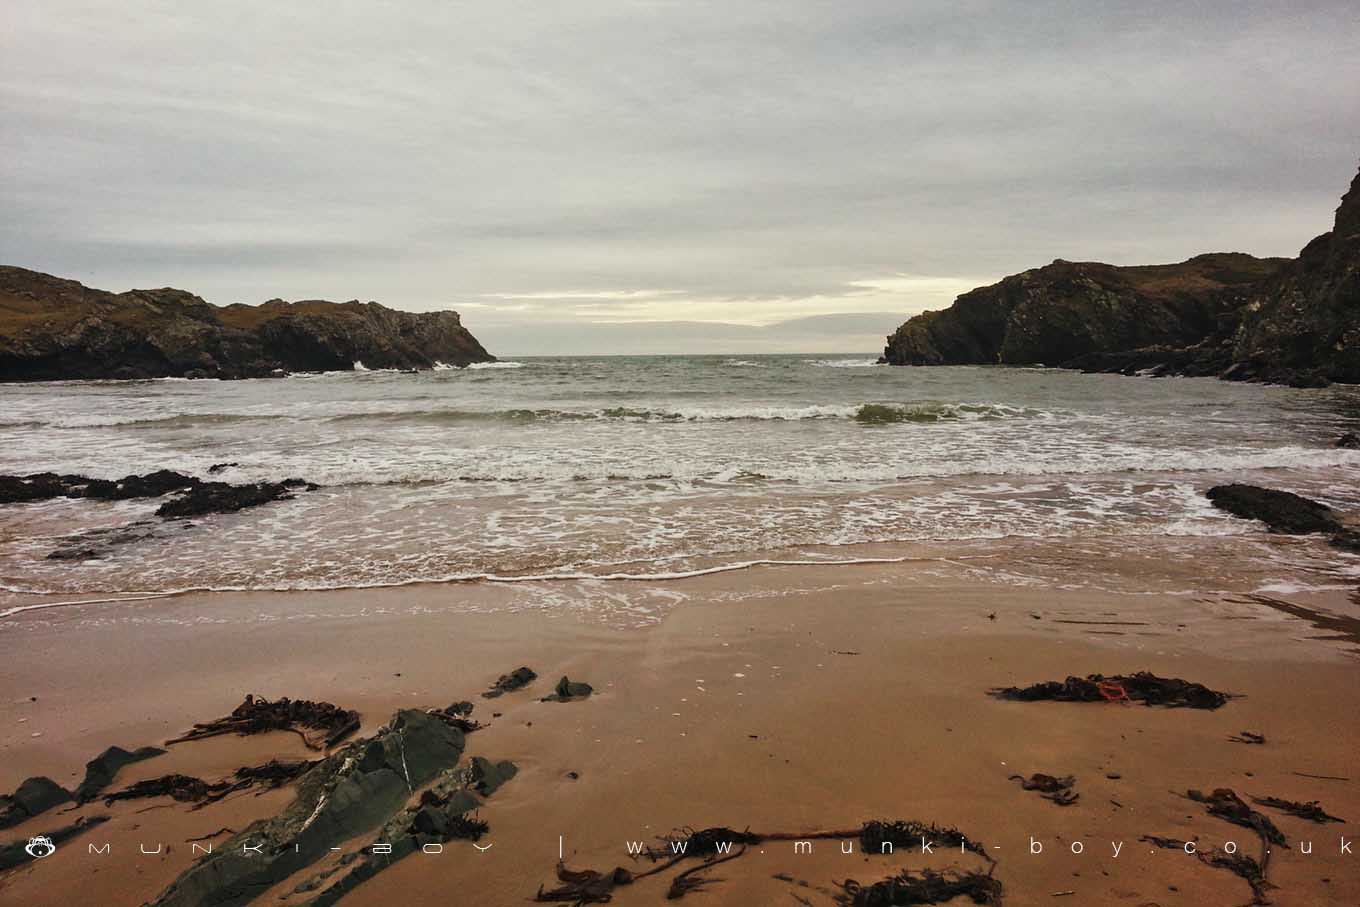 Beaches in Isle of Anglesey (Ynys Mon)